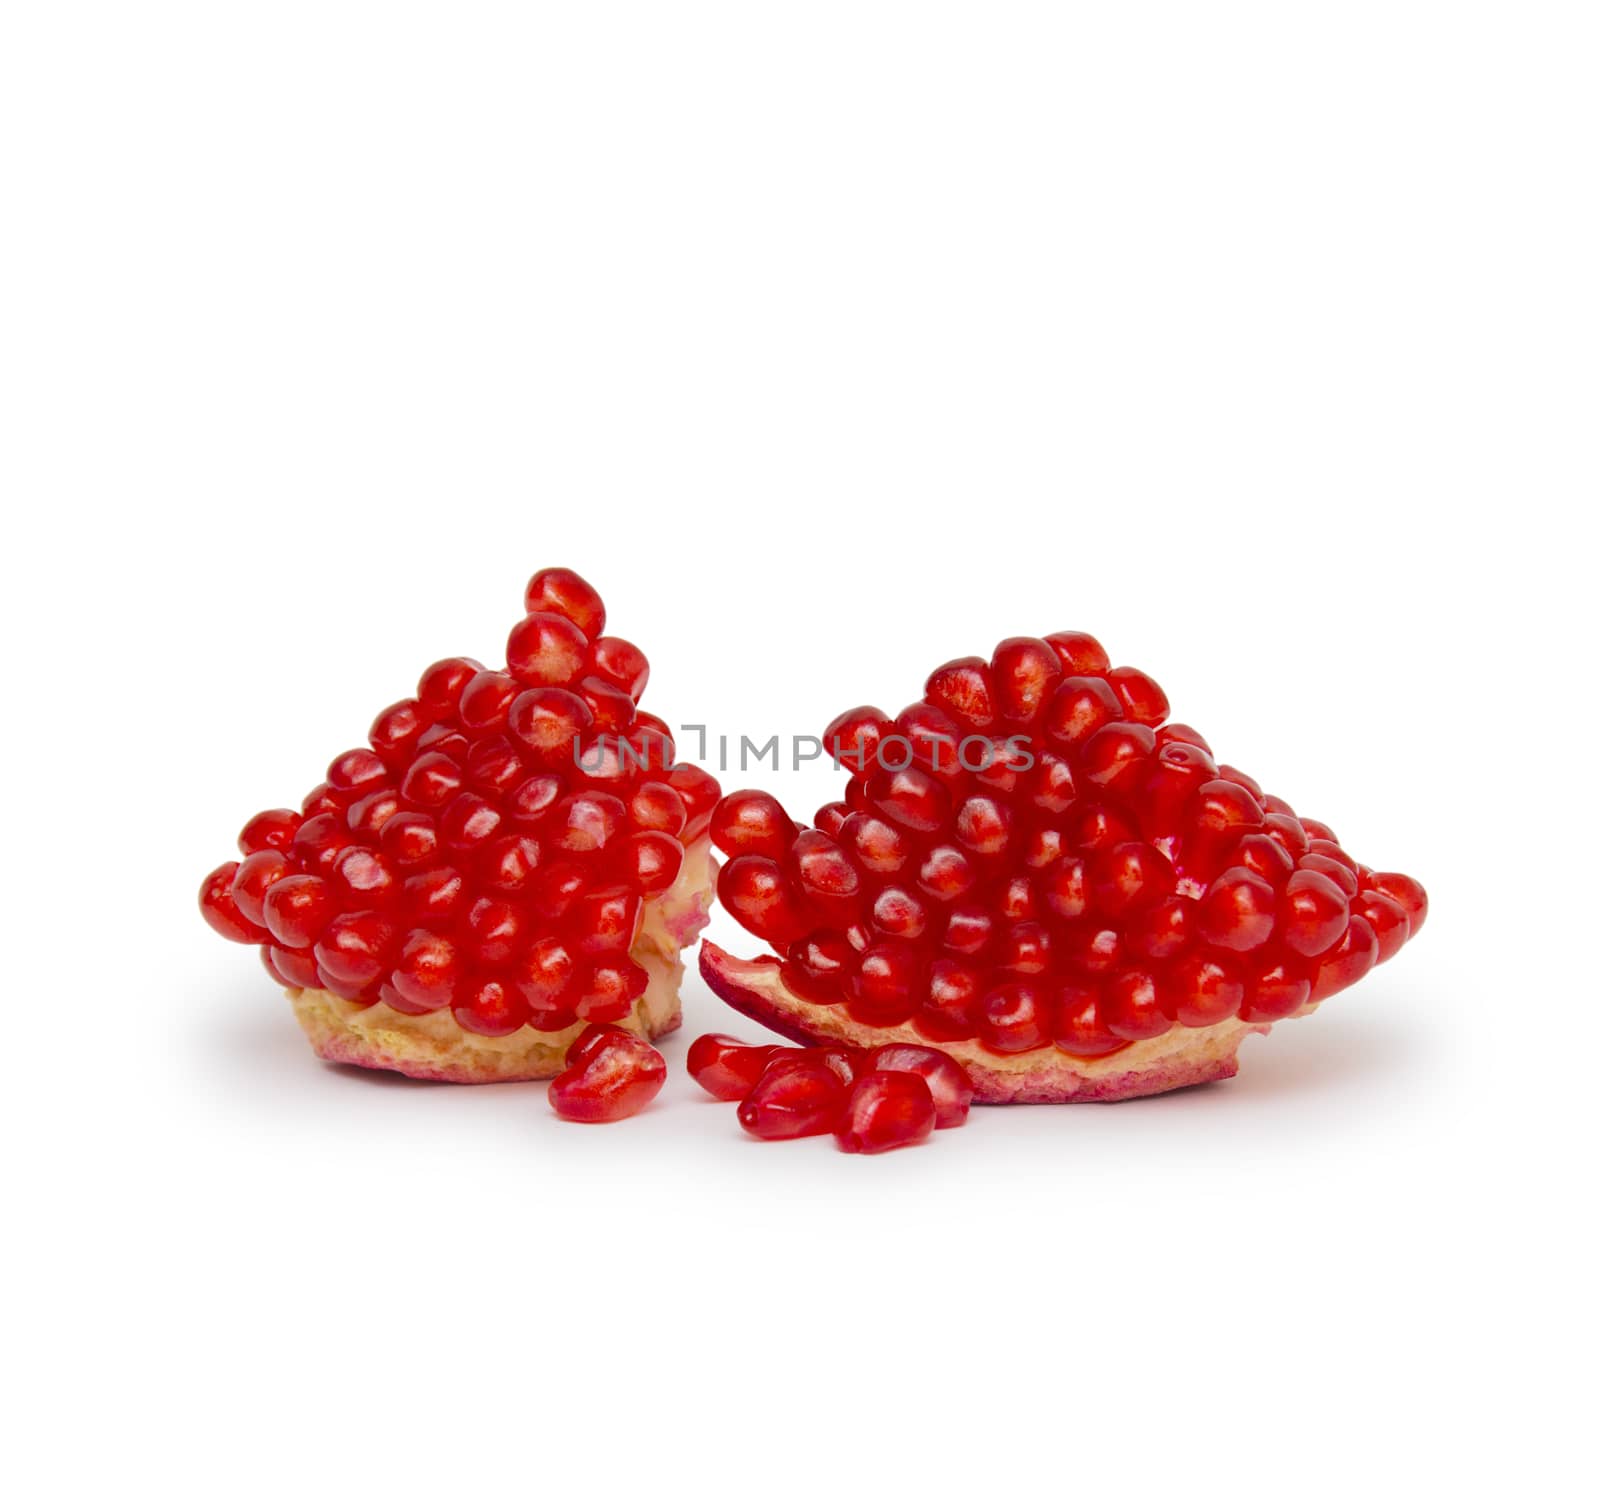 Ripe pomegranate fruit isolated on white background cutout by cocoo